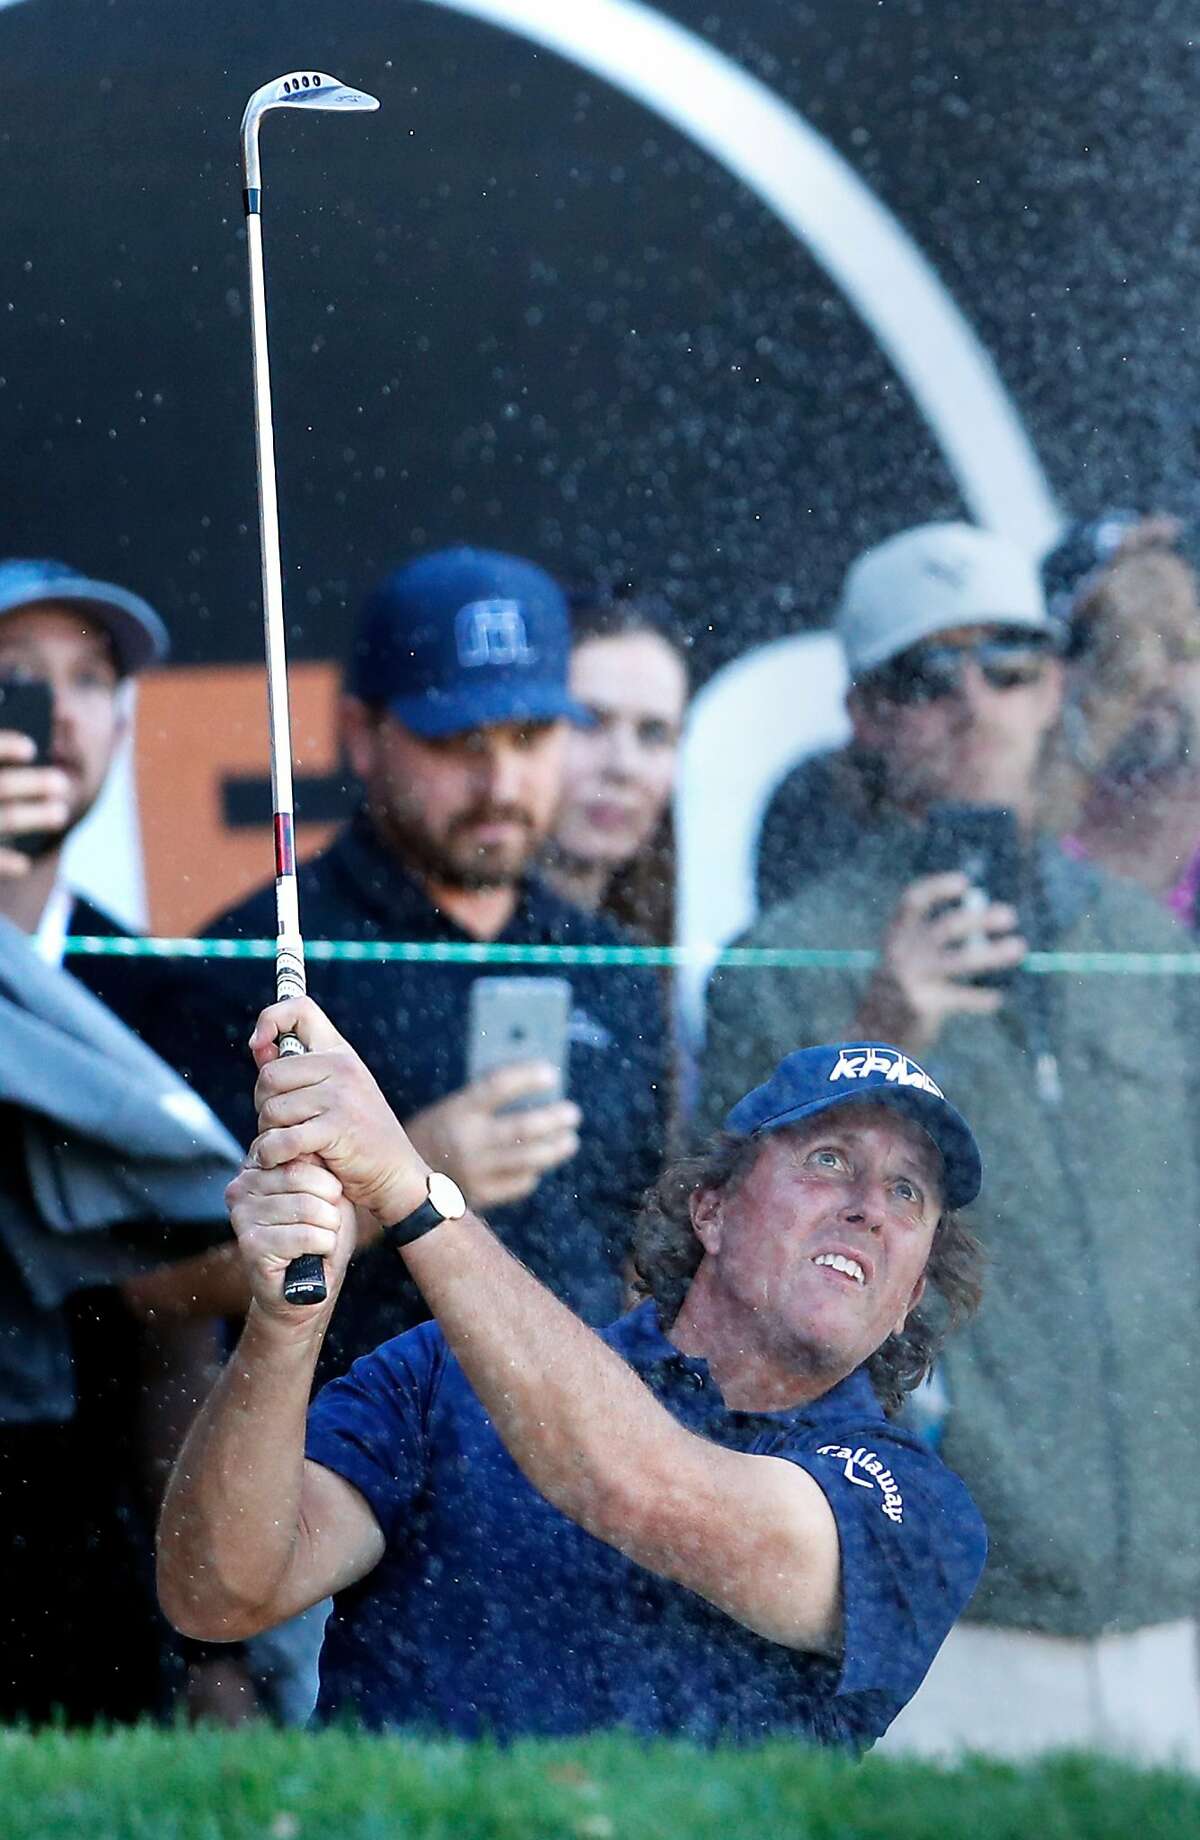 Phil Mickelson hits out of bunker on 18th hole during final round of Safeway Open at Silverado Resort in Napa, Calif. on Sunday, October 7, 2018.